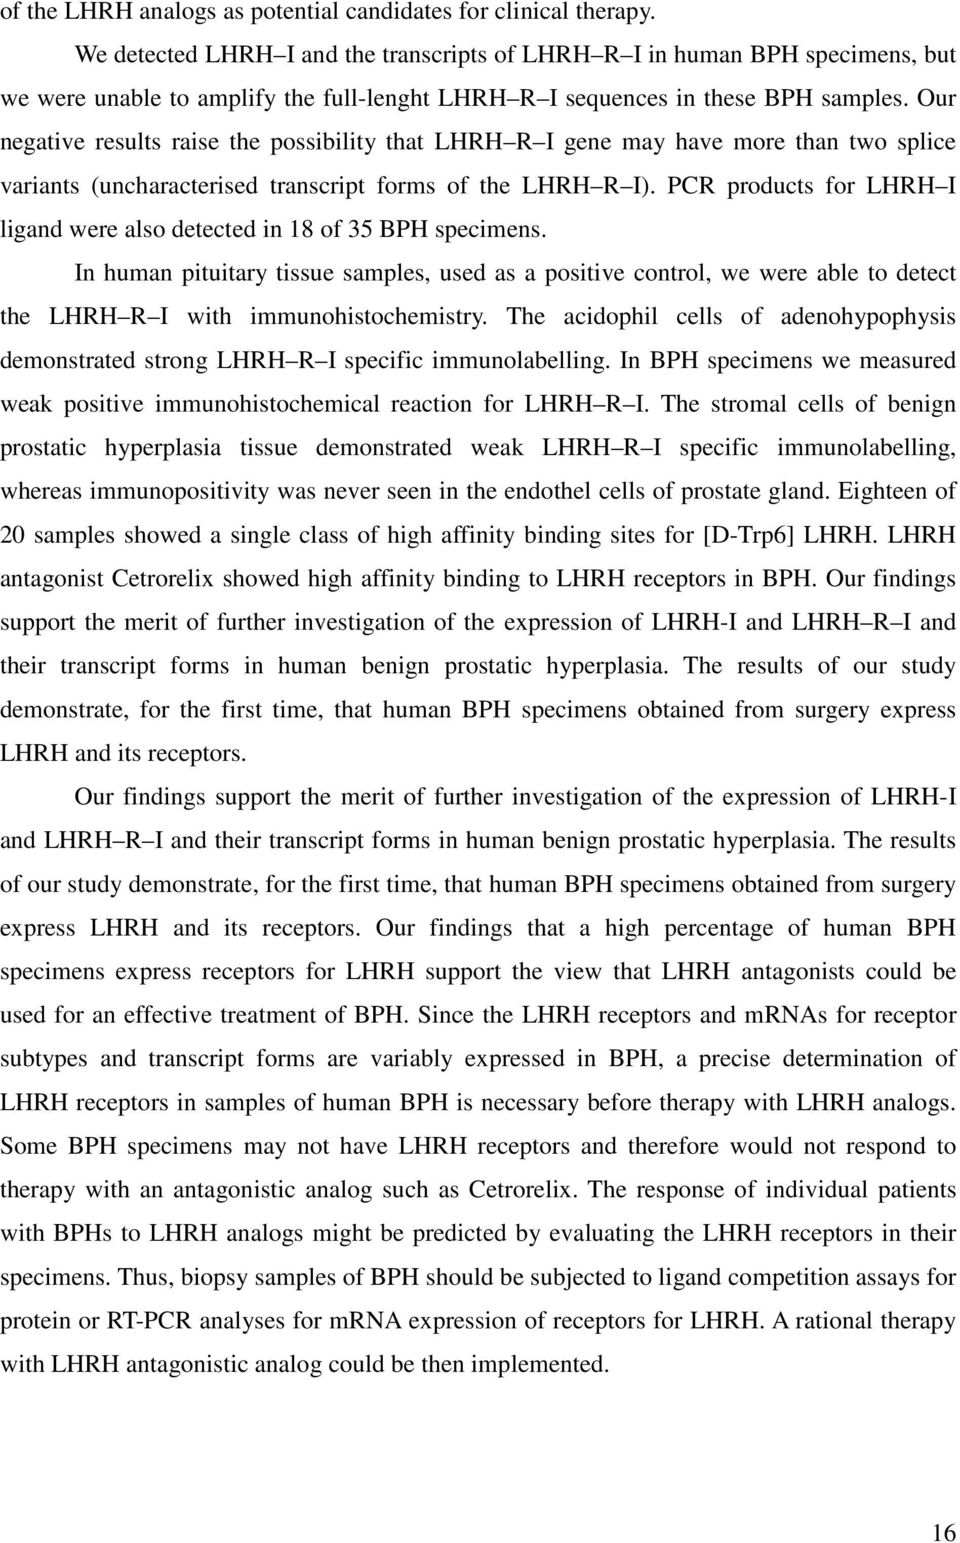 Our negative results raise the possibility that LHRH R I gene may have more than two splice variants (uncharacterised transcript forms of the LHRH R I).